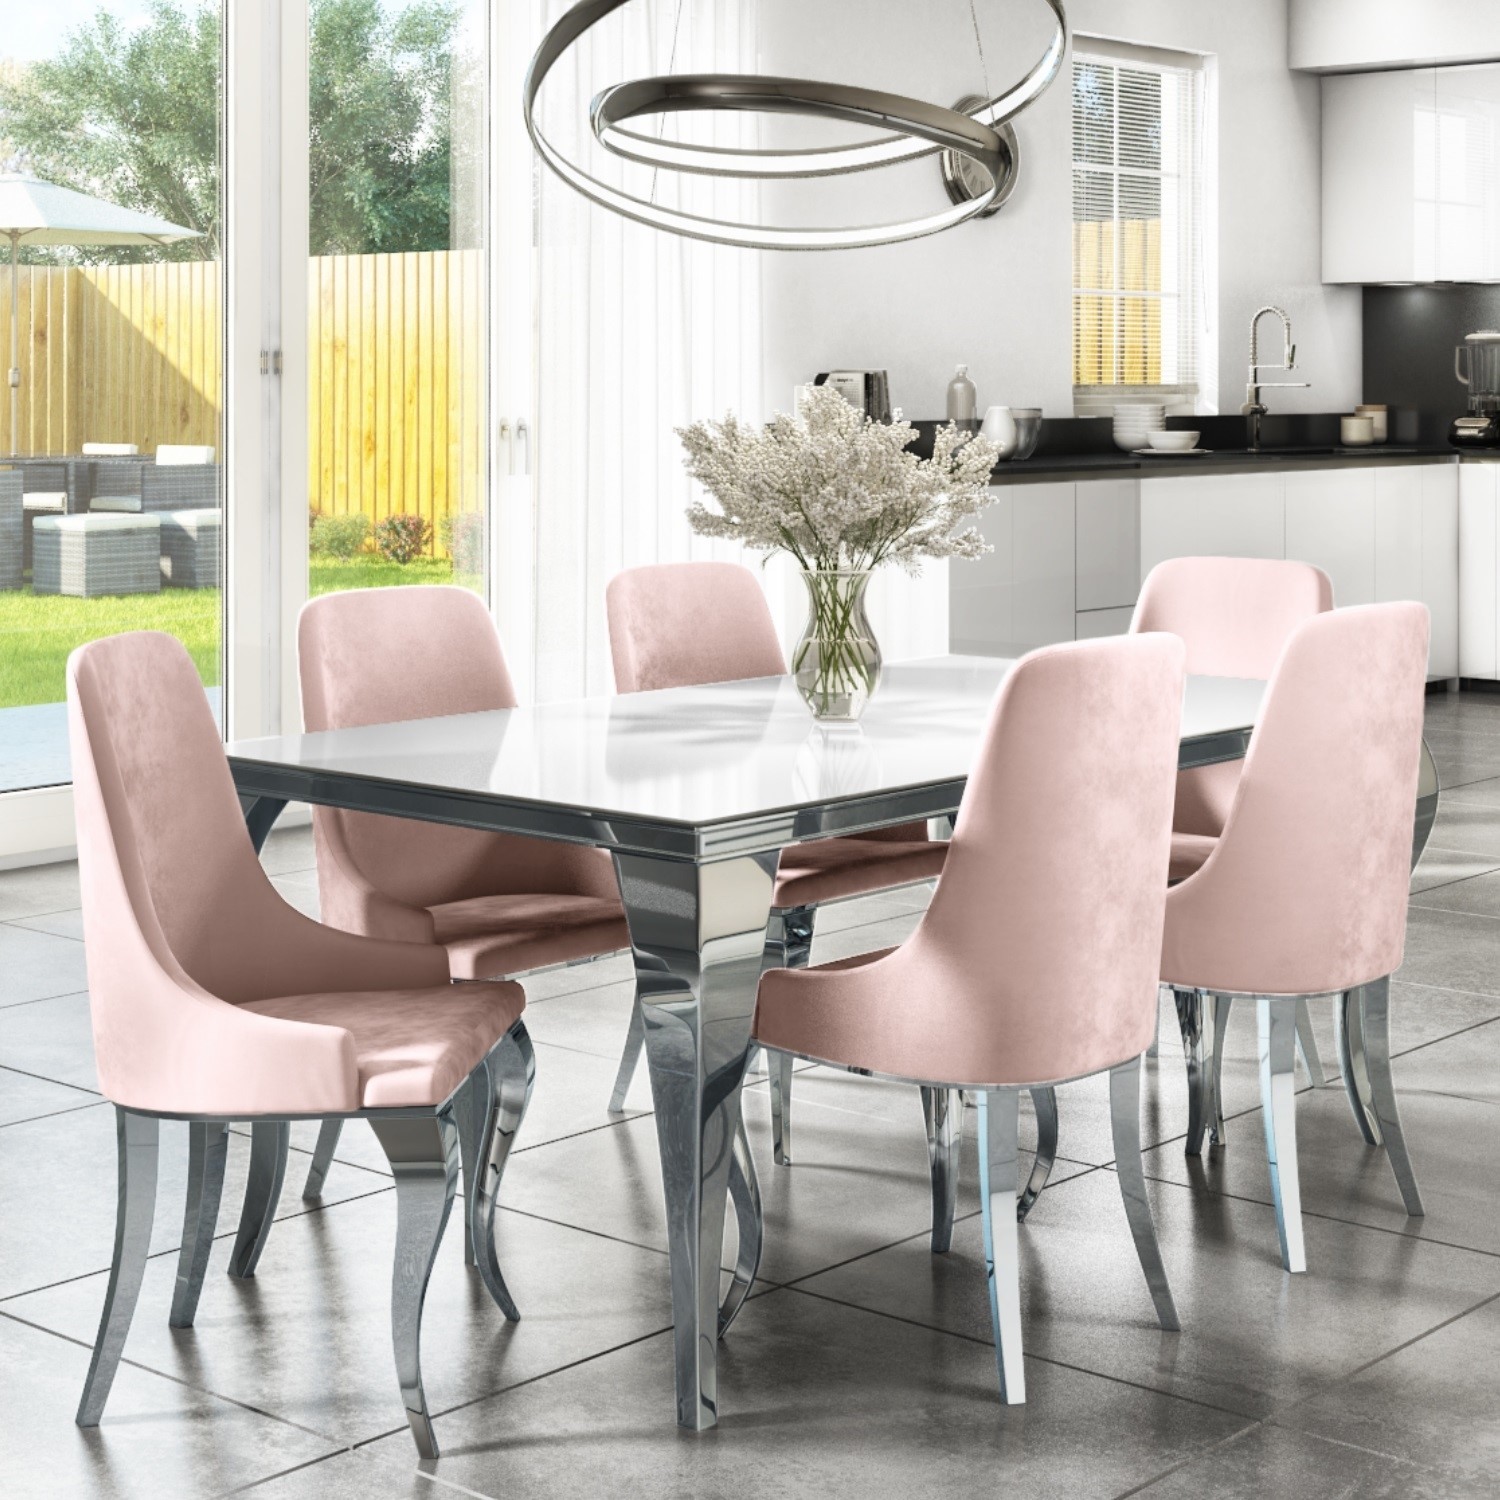 Mirrored 160cm Dining Table Set With, Light Pink Dining Room Chairs